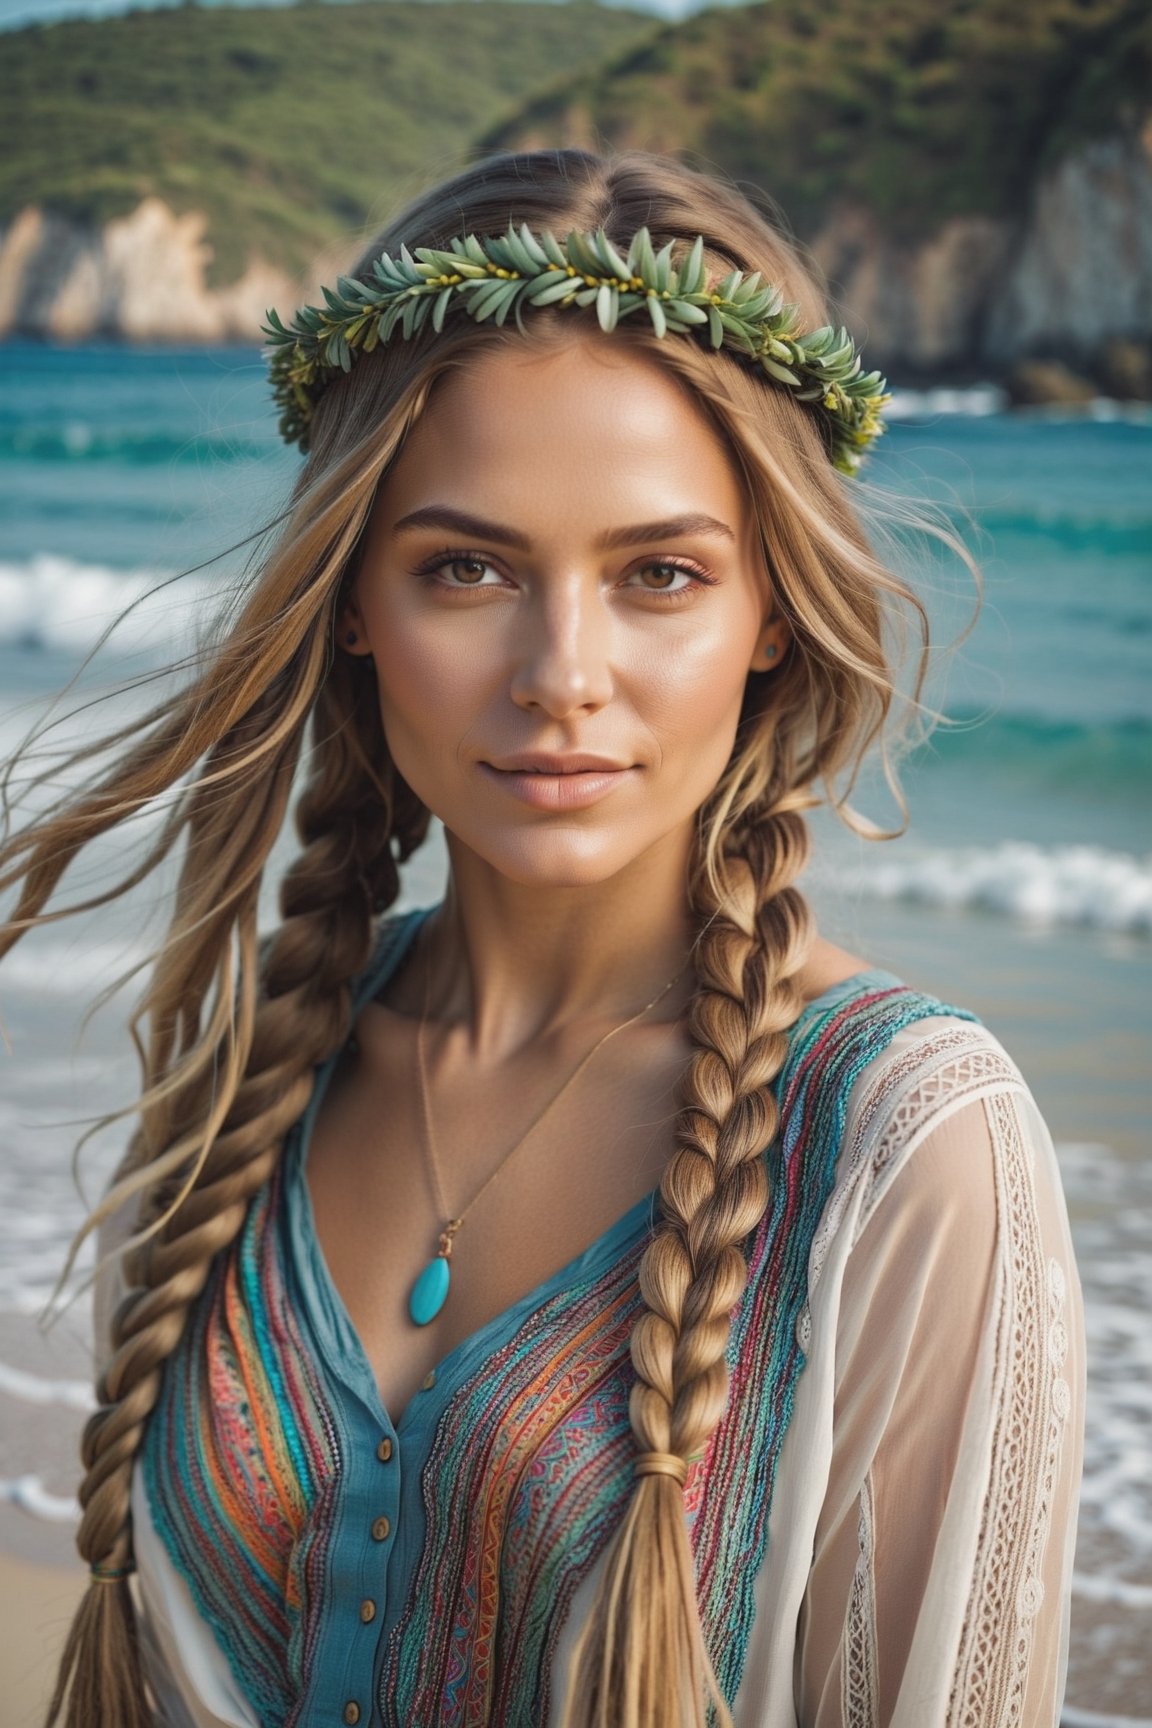 A hippie woman with beautifully braided hair. naturally cute. portrait photo by the sea, dynamic pose, intense gaze, joyful expression. soft natural lighting